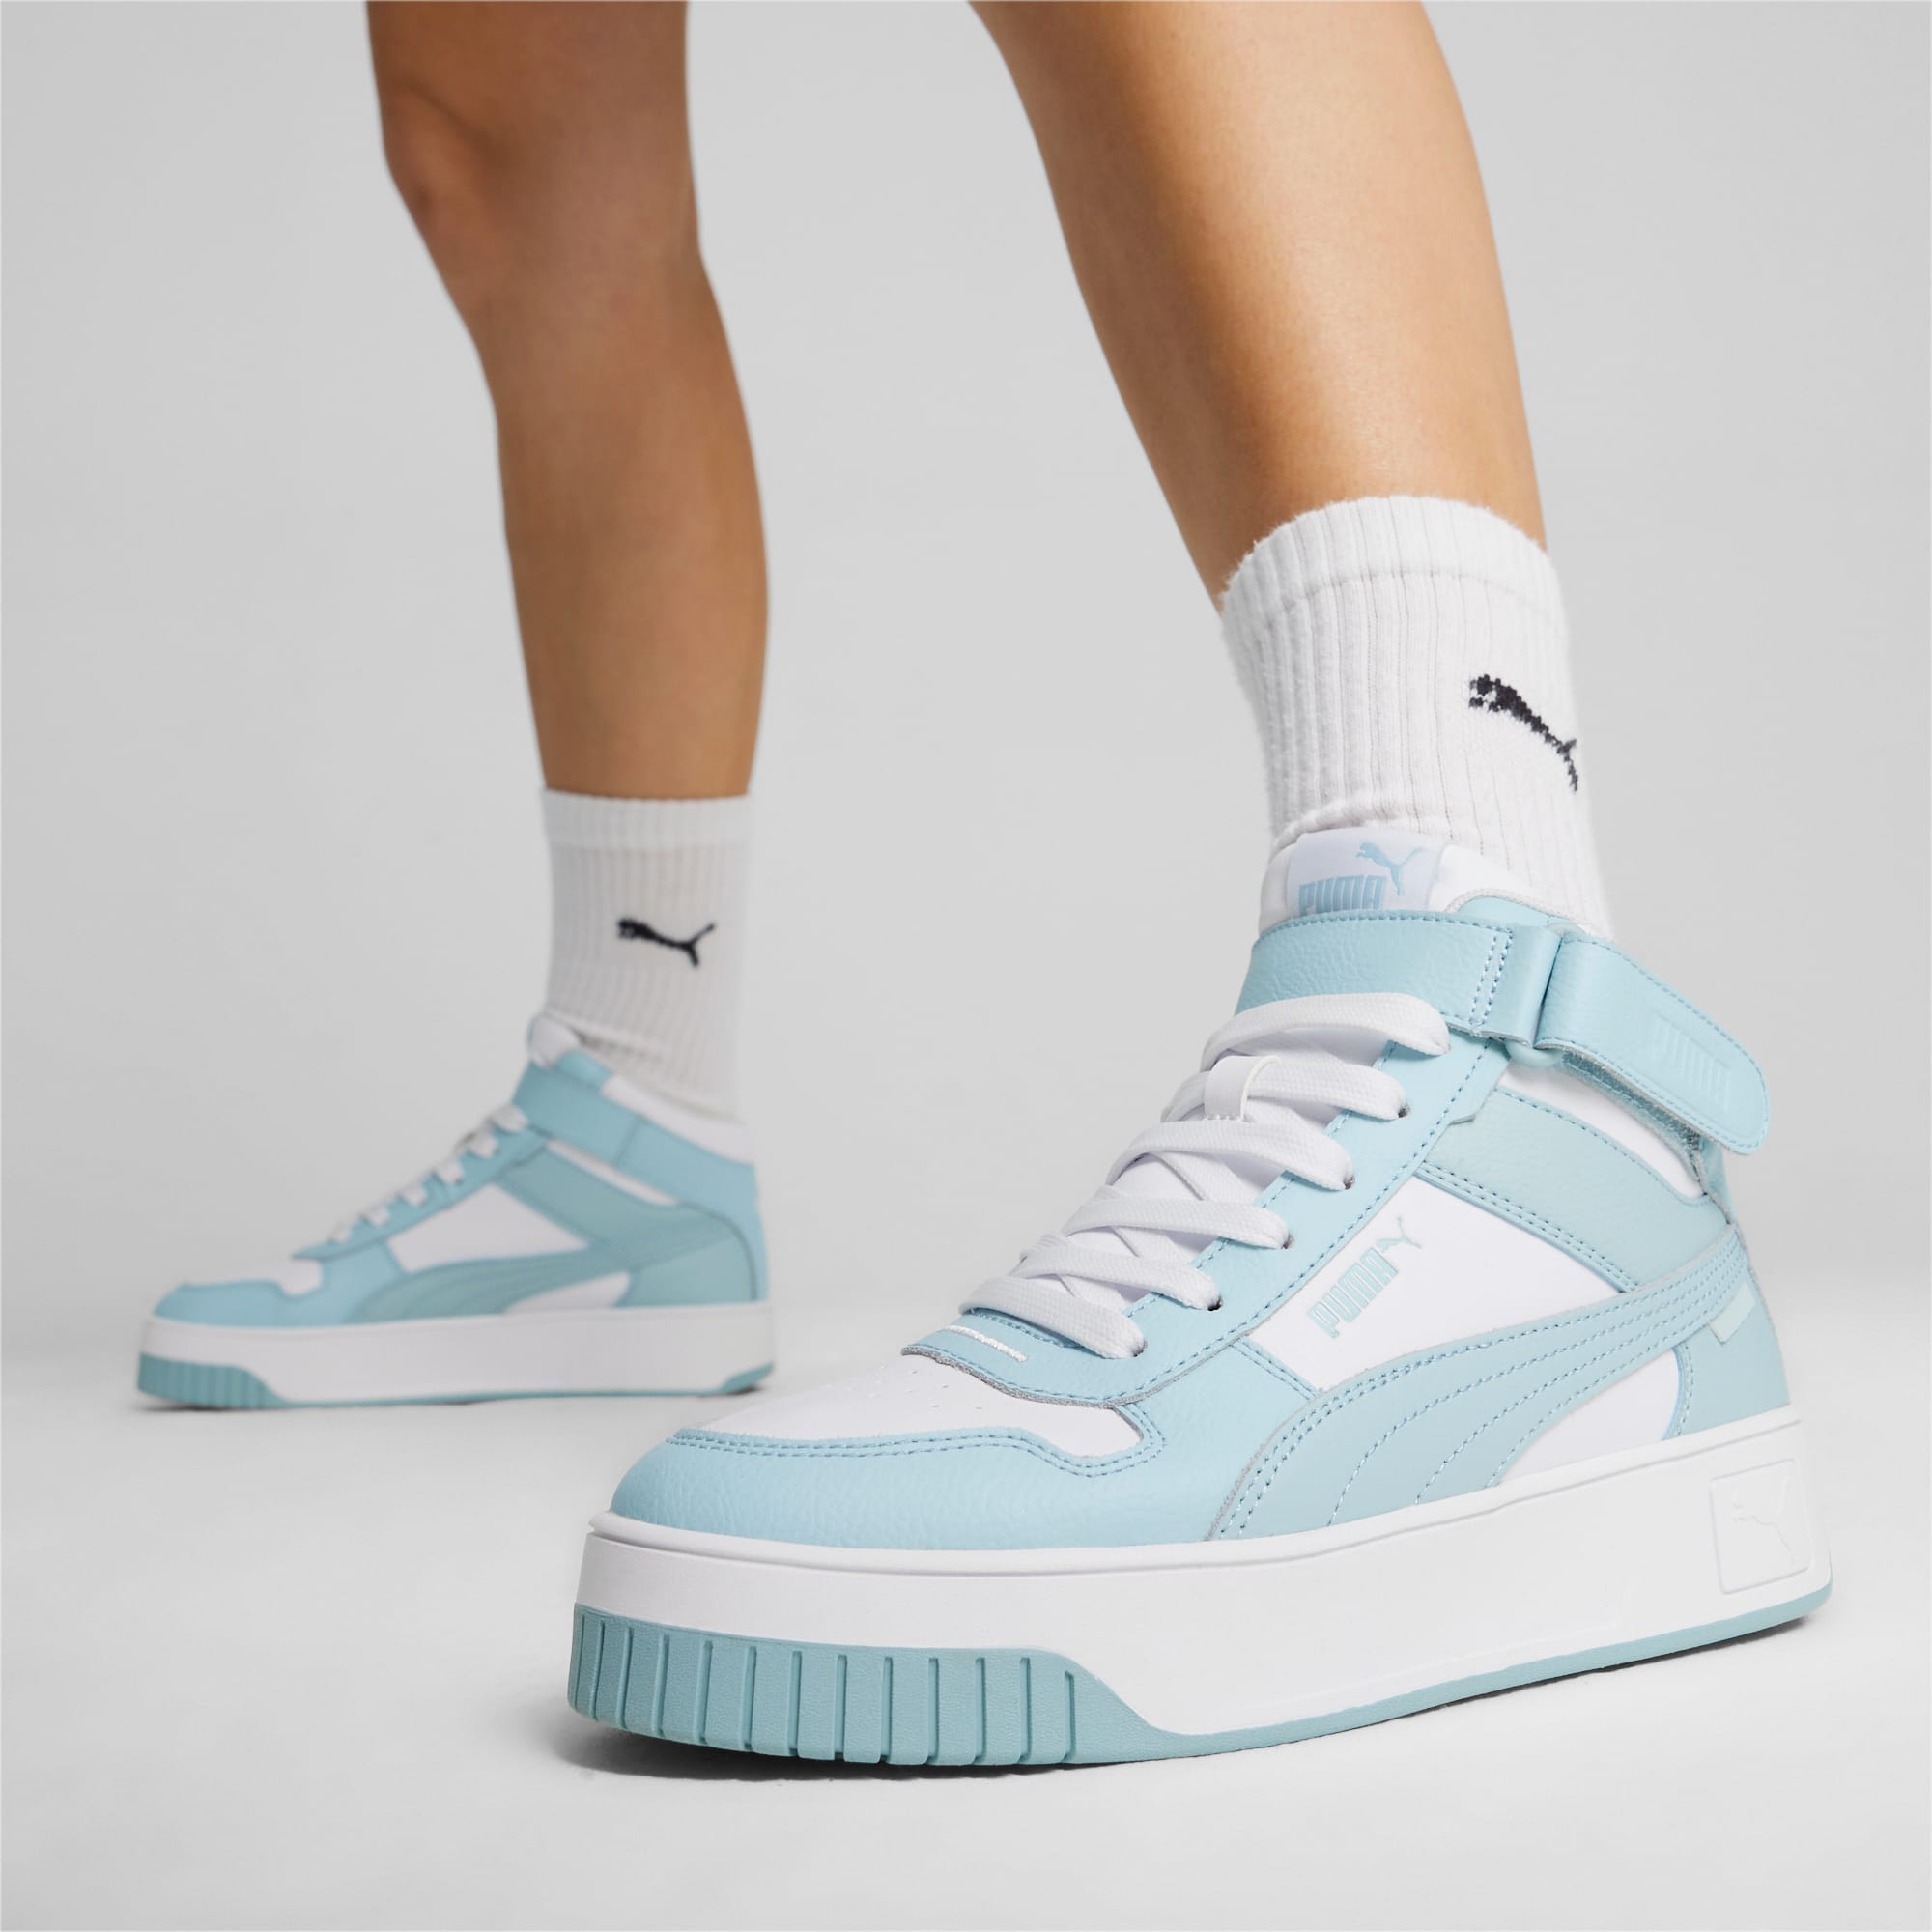 PUMA Carina Street Mid Women's Sneakers, White/Turquoise Surf, Size 42,5, Shoes